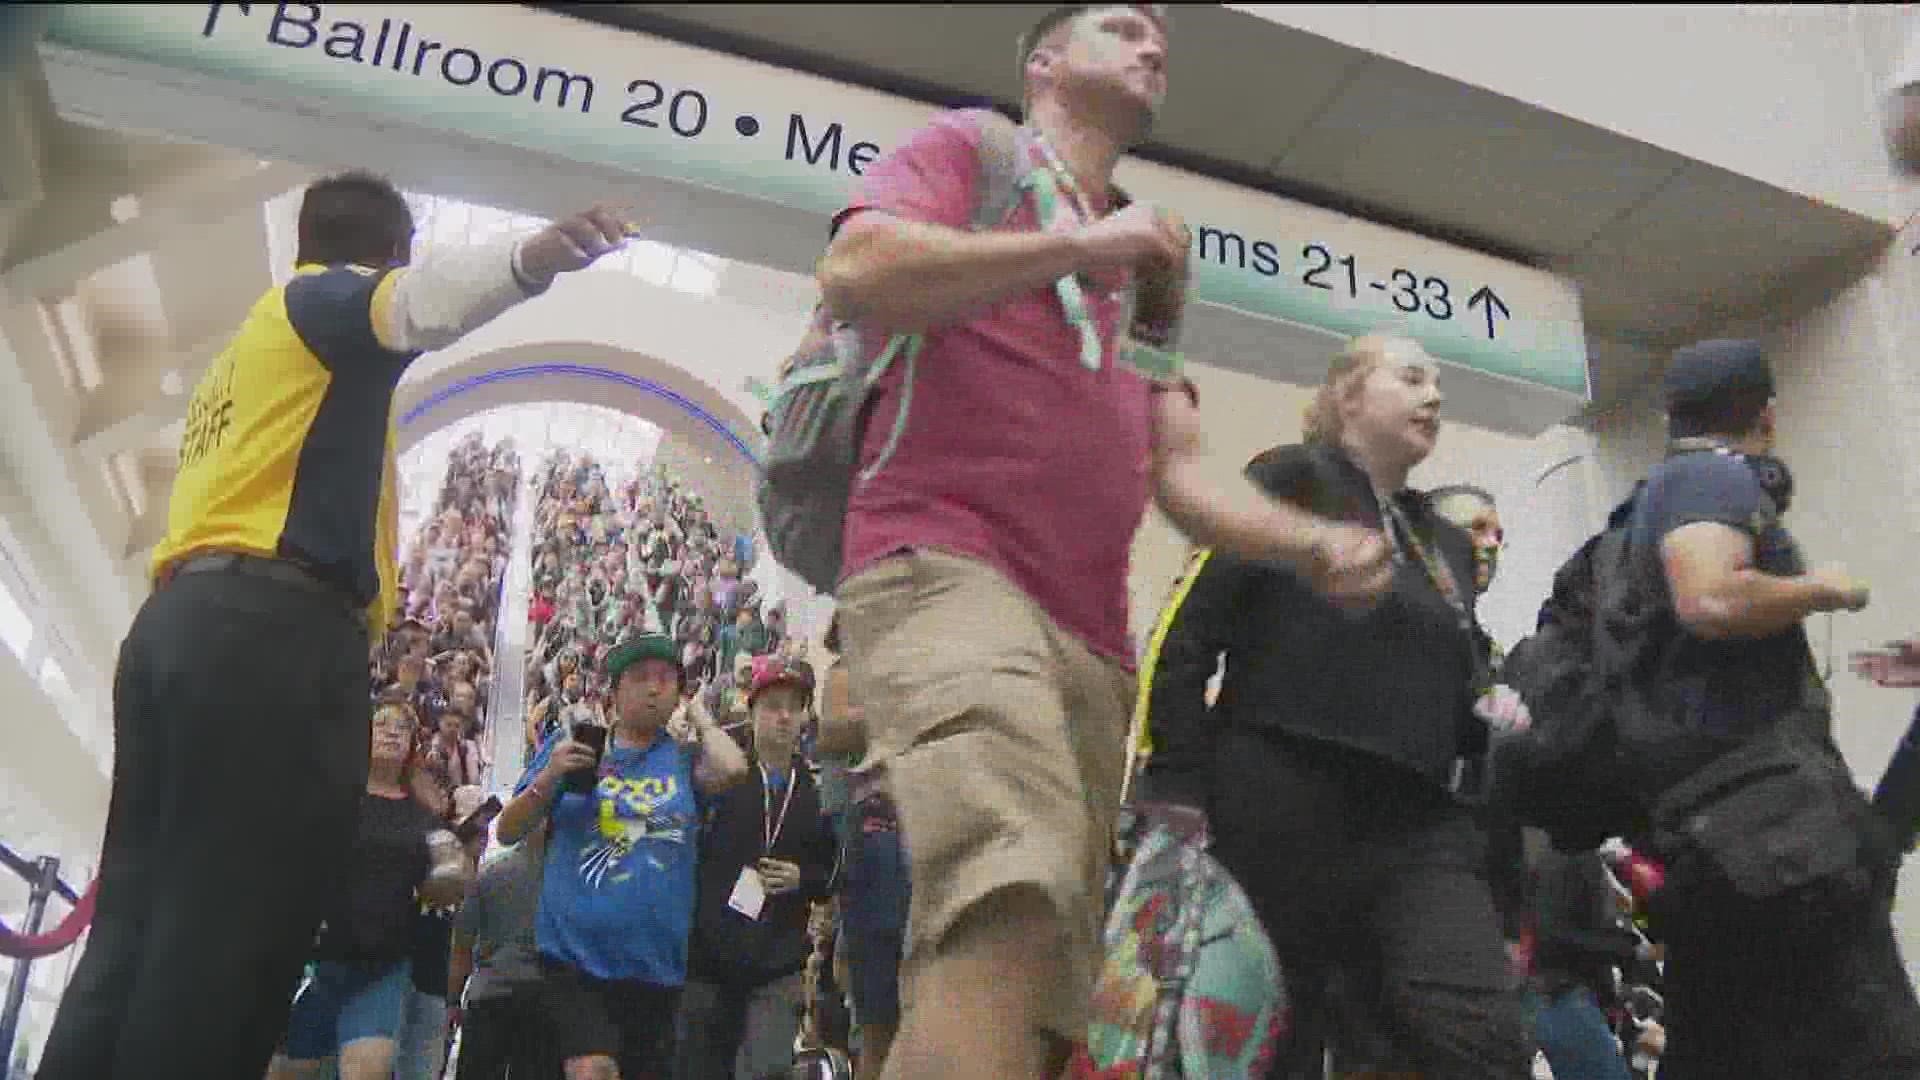 New concerns over rising Covid numbers come ahead of a very busy couple of weeks for San Diego, from Pride to Comic-Con.